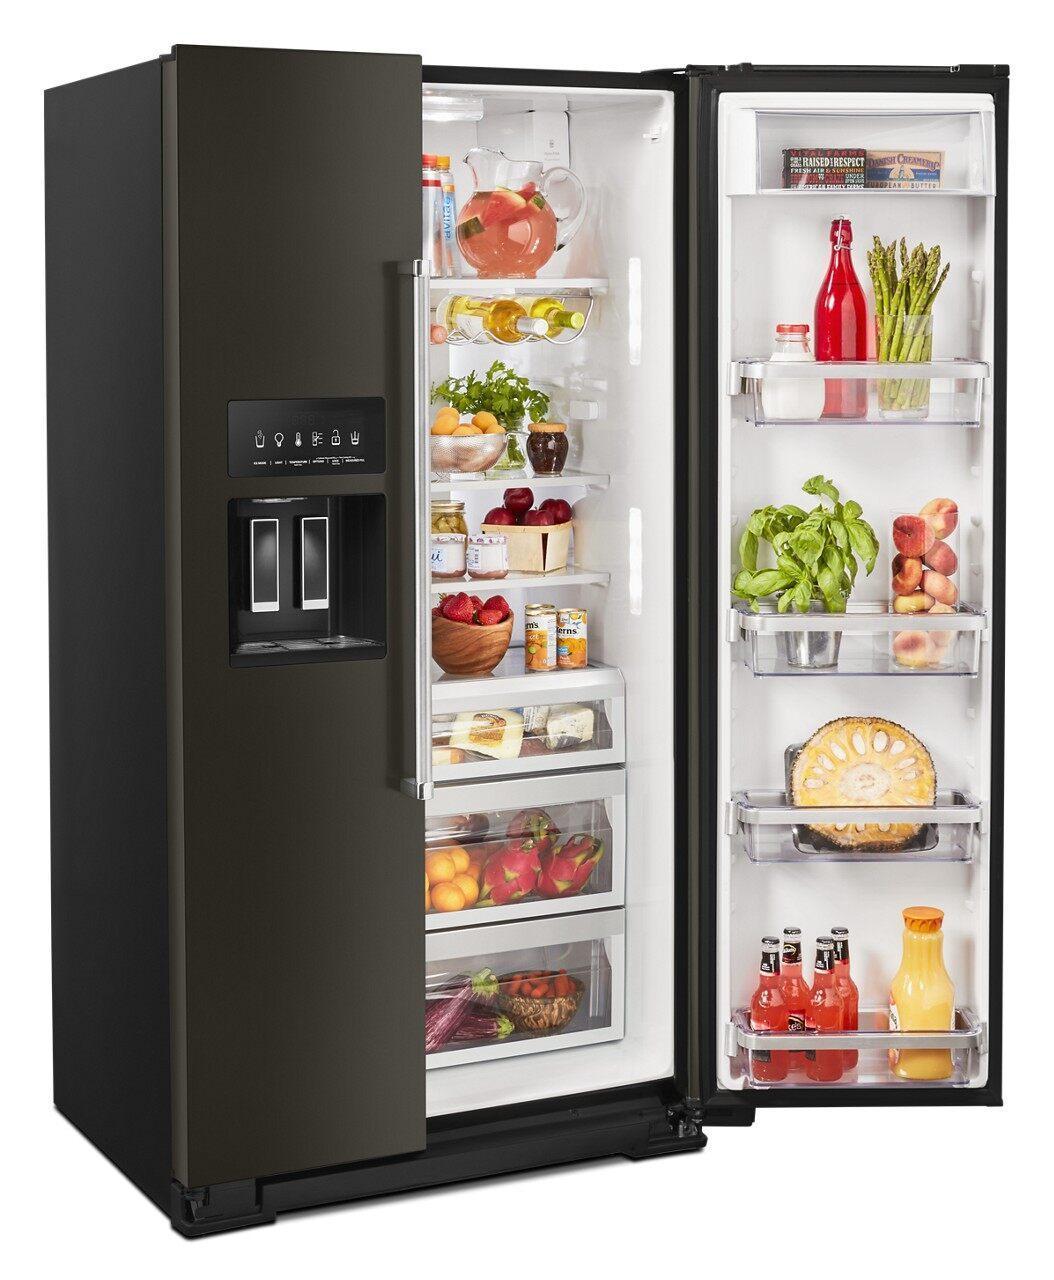 KitchenAid - 35.75 Inch 20 cu. ft Side by Side Refrigerator in Black Stainless - KRSC700HBS